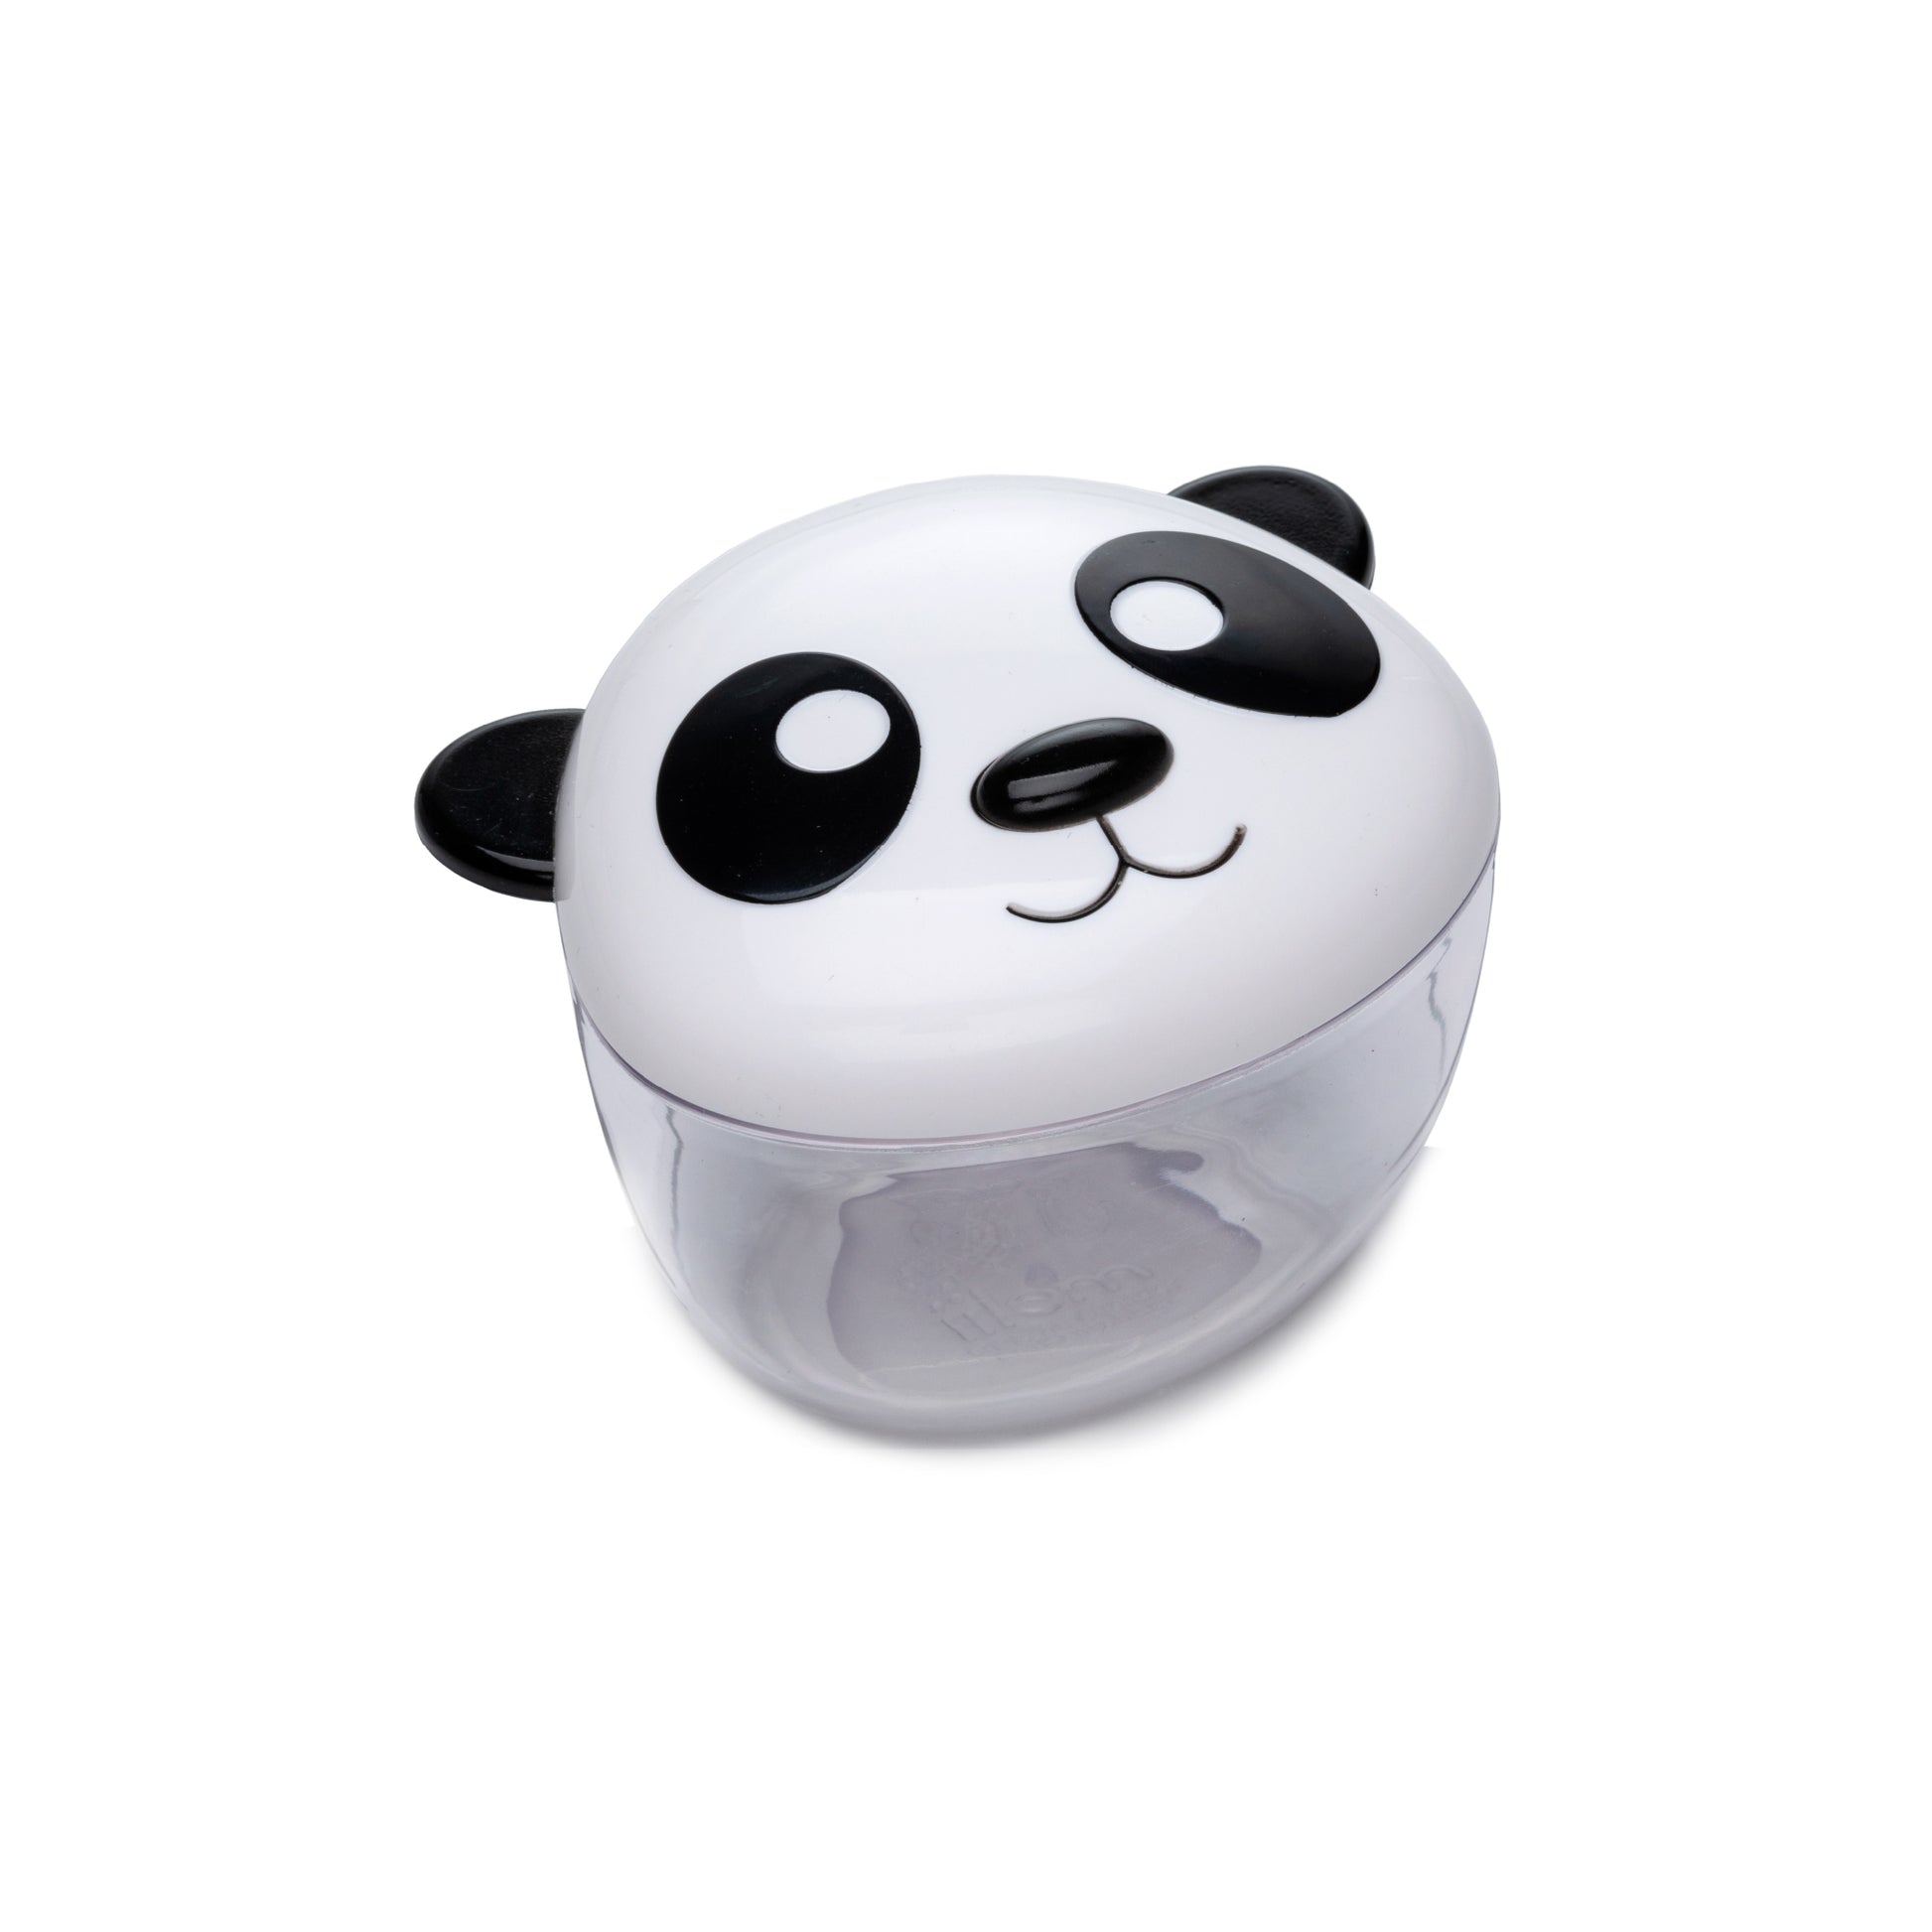 Melii Panda Snack Containers with Lids - Safe and Playful Food Storage for Toddlers and Kids